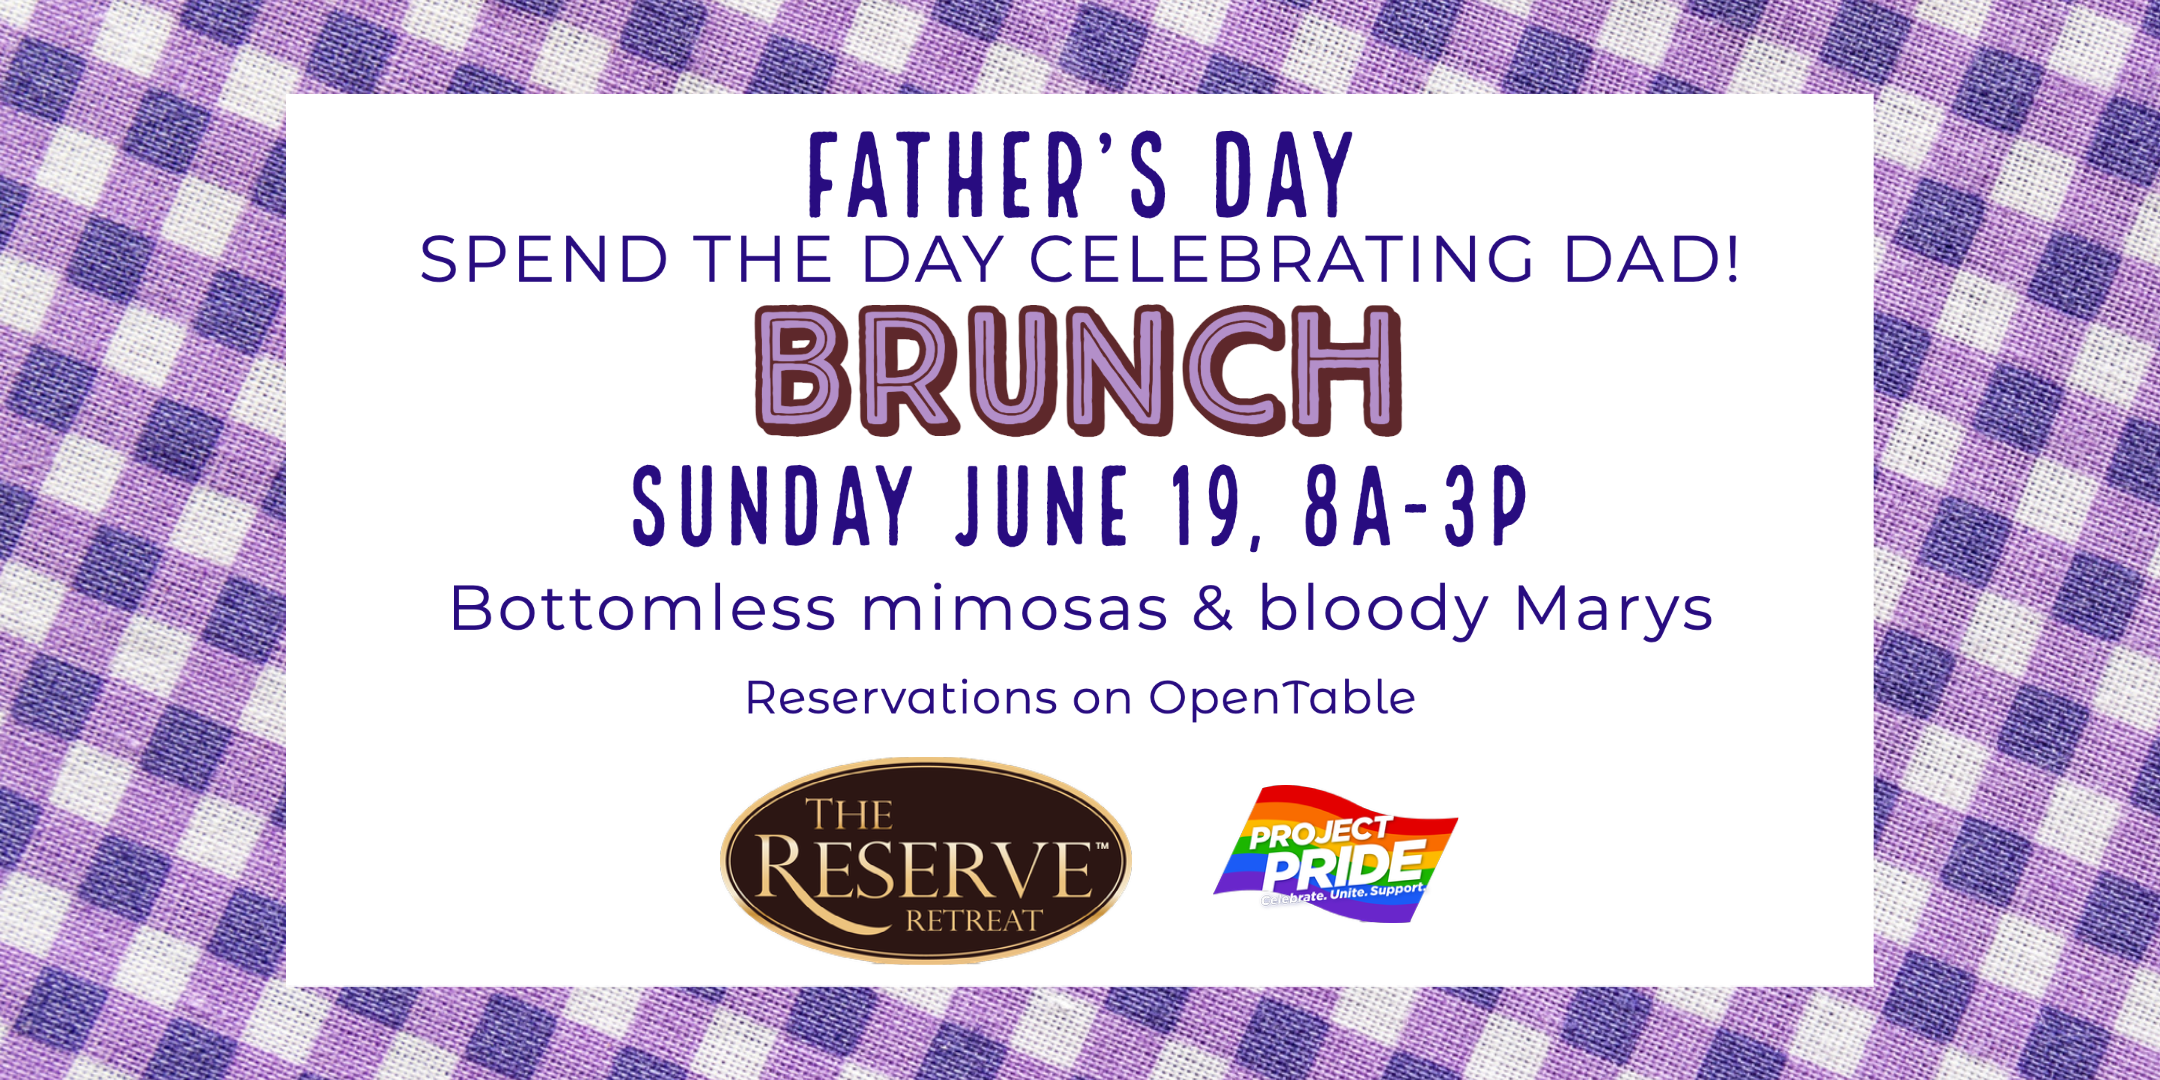 Father's Day Brunch at The Reserve Retreat in Sarasota, FL